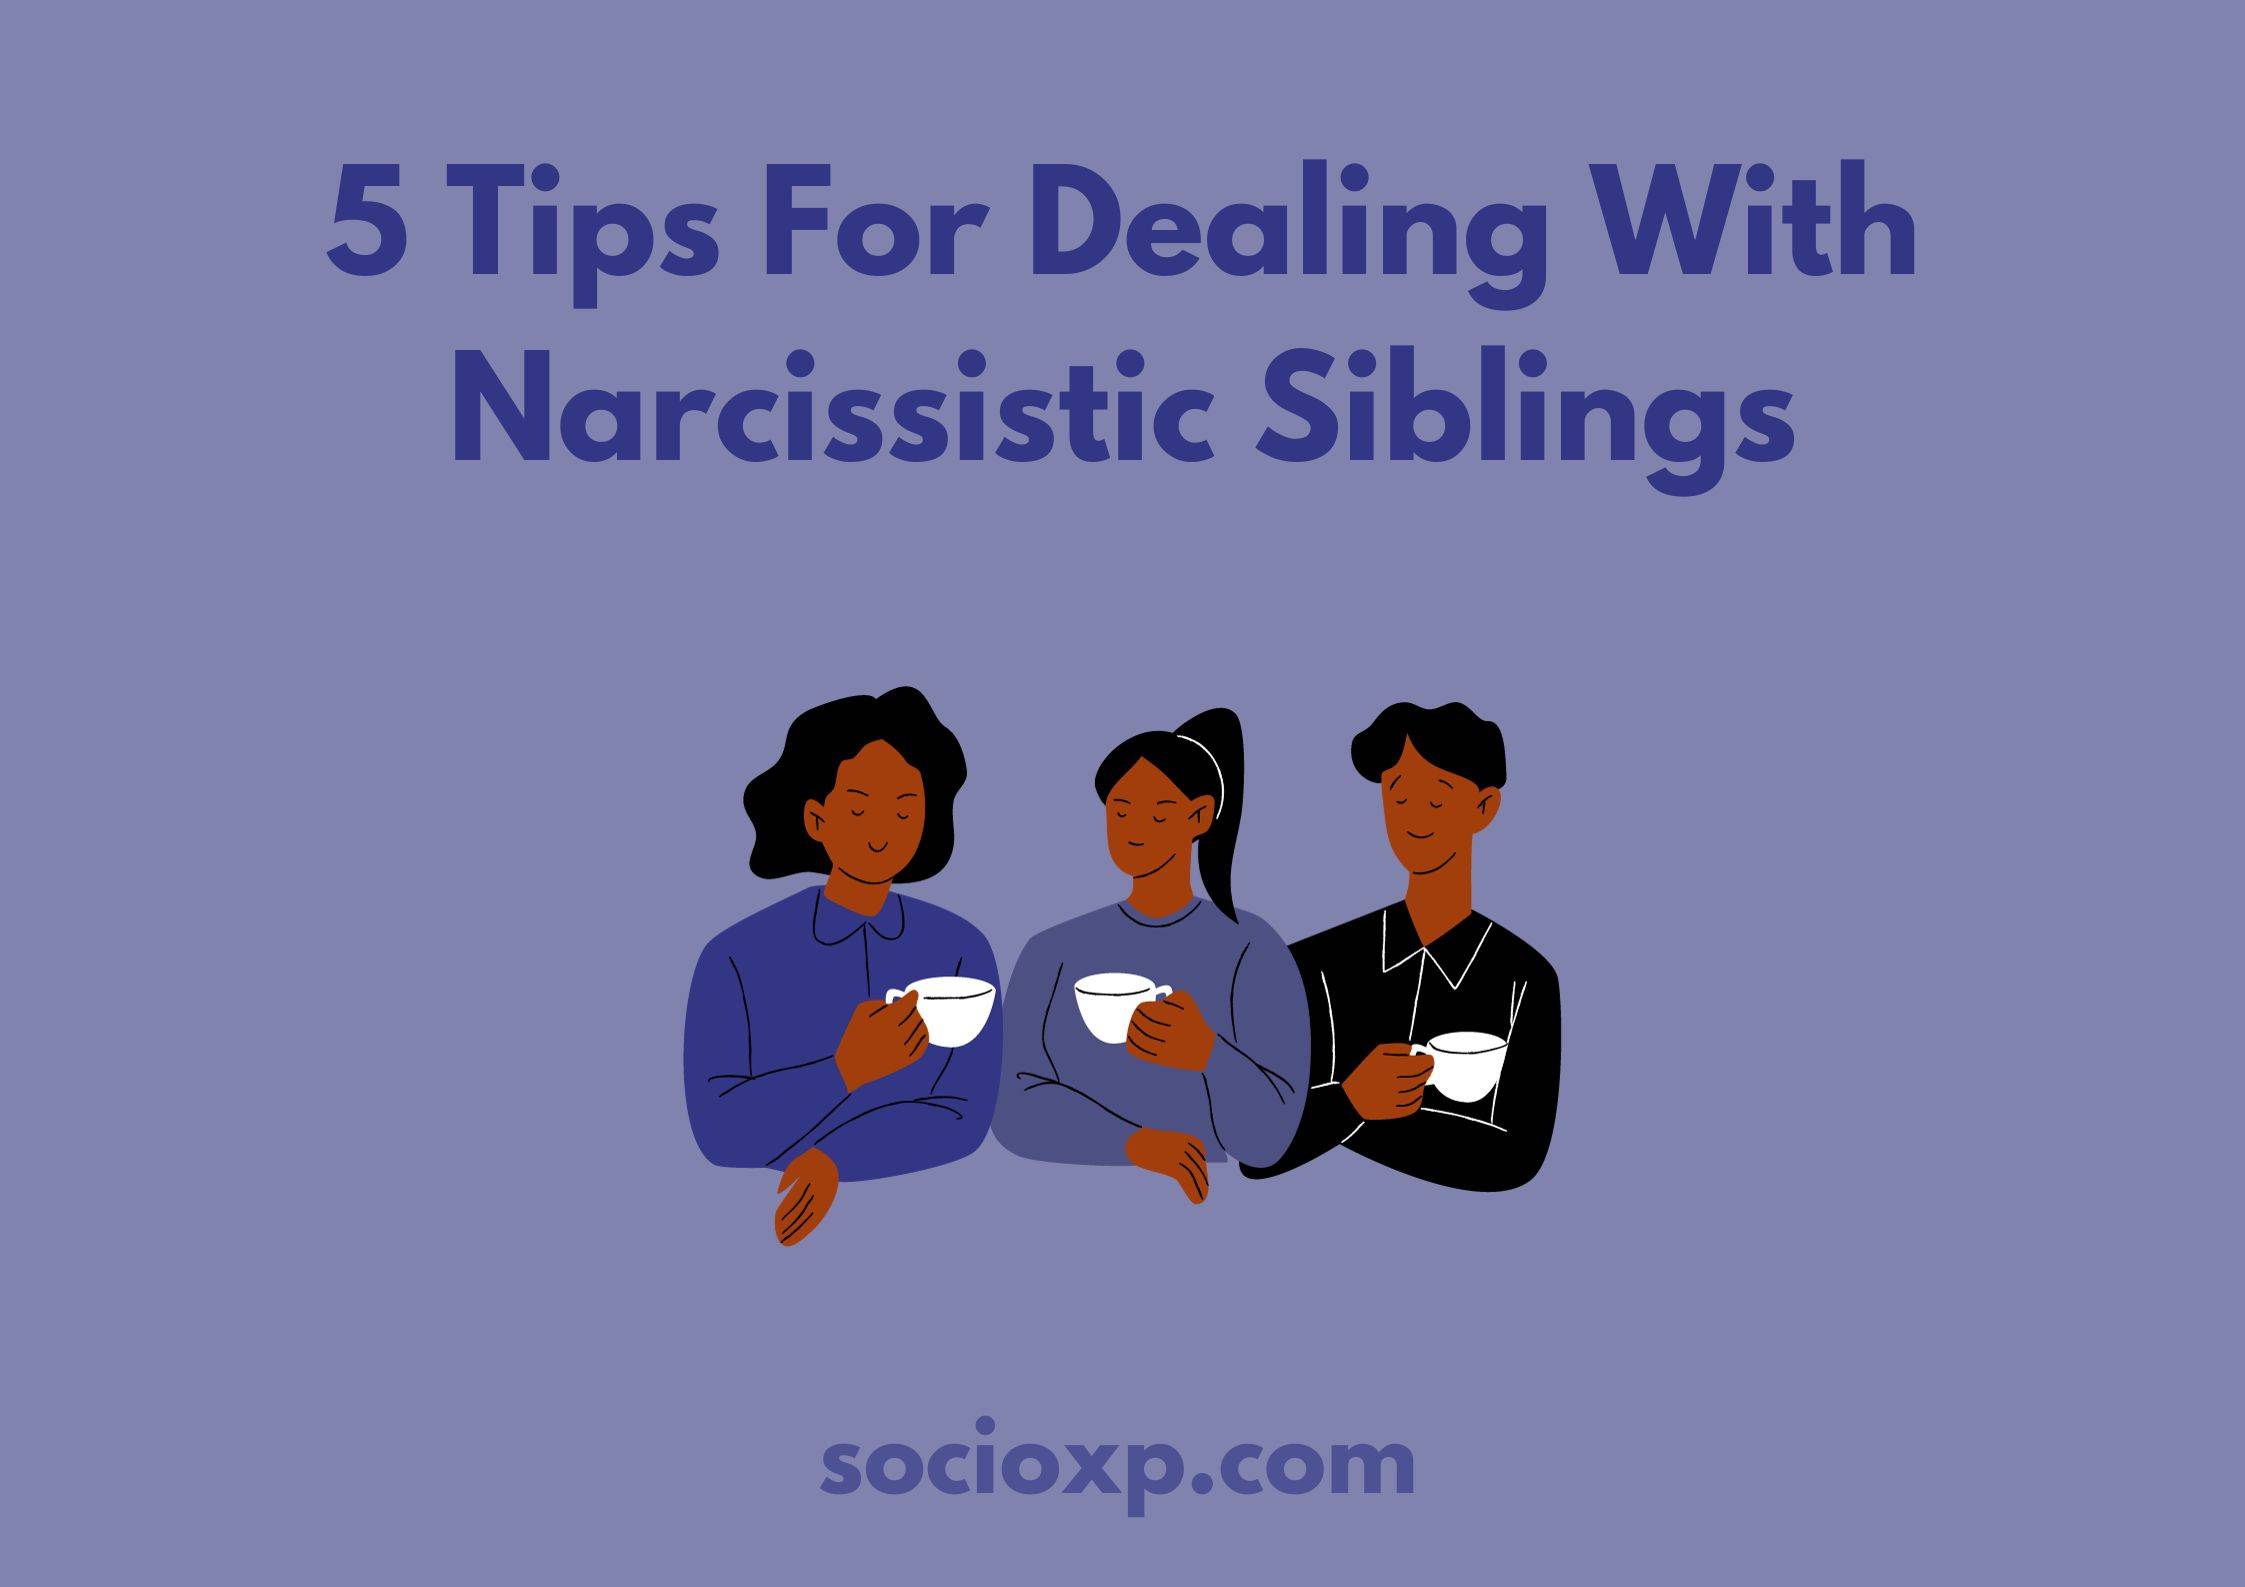 5 Tips For Dealing With Narcissistic Siblings